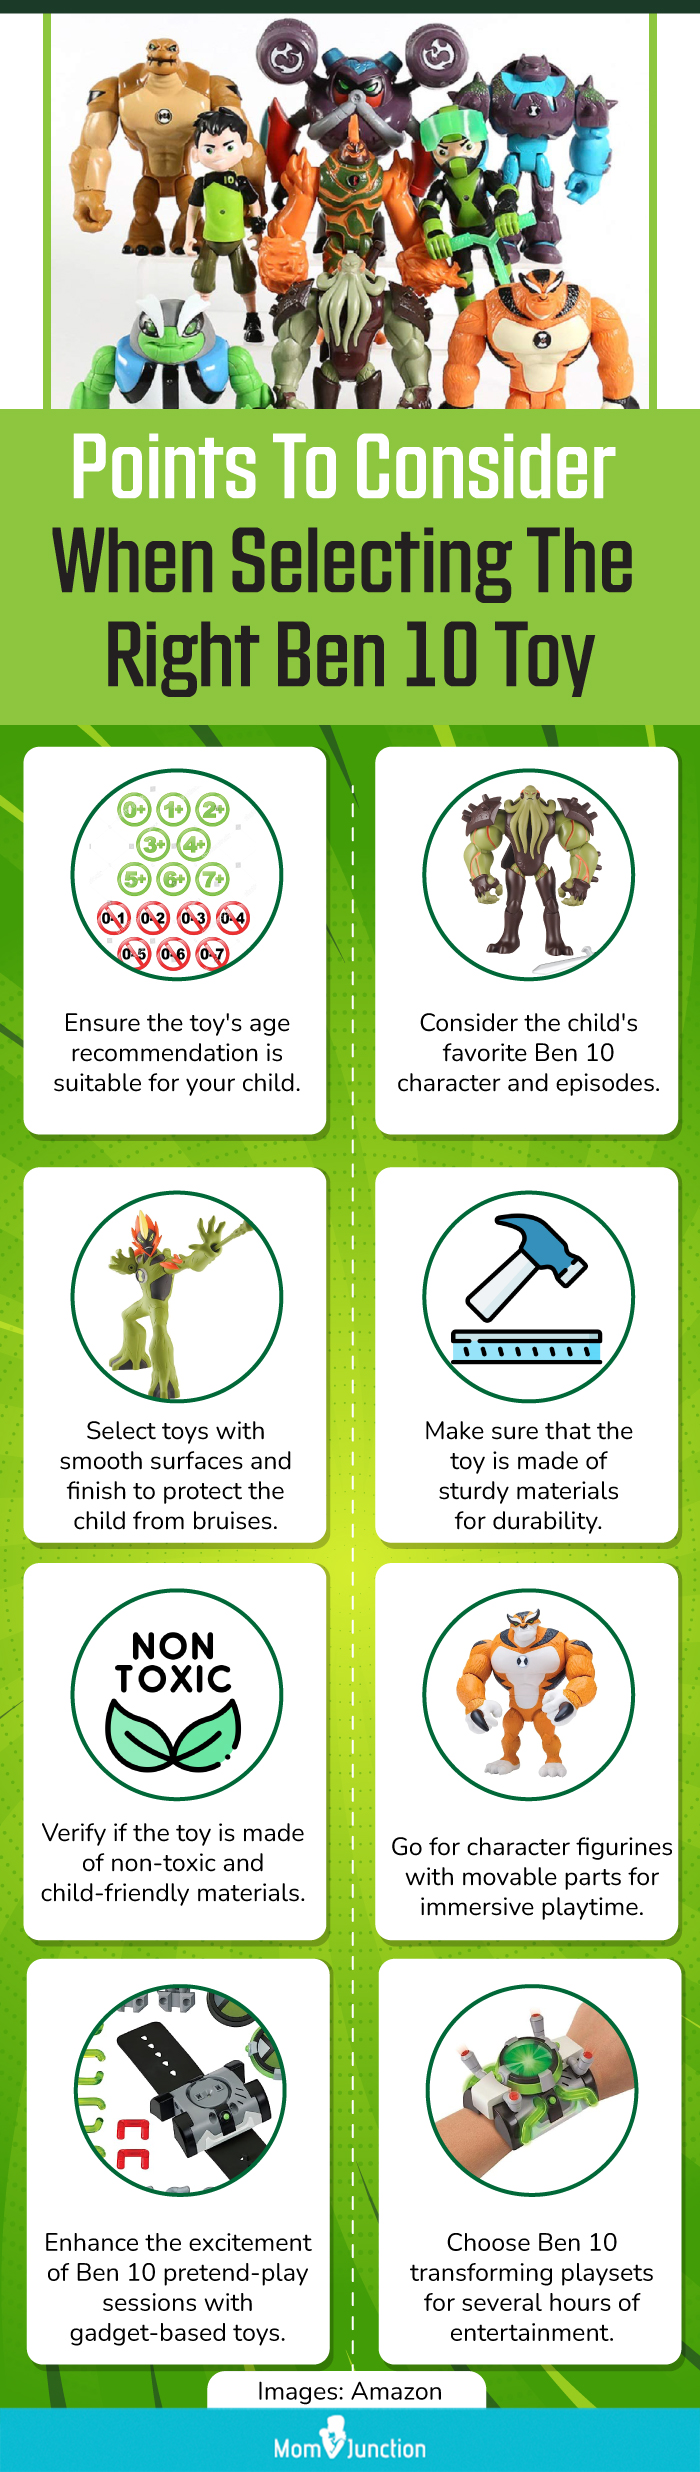 Points To Consider When Selecting The Right Ben 10 Toy (infographic)